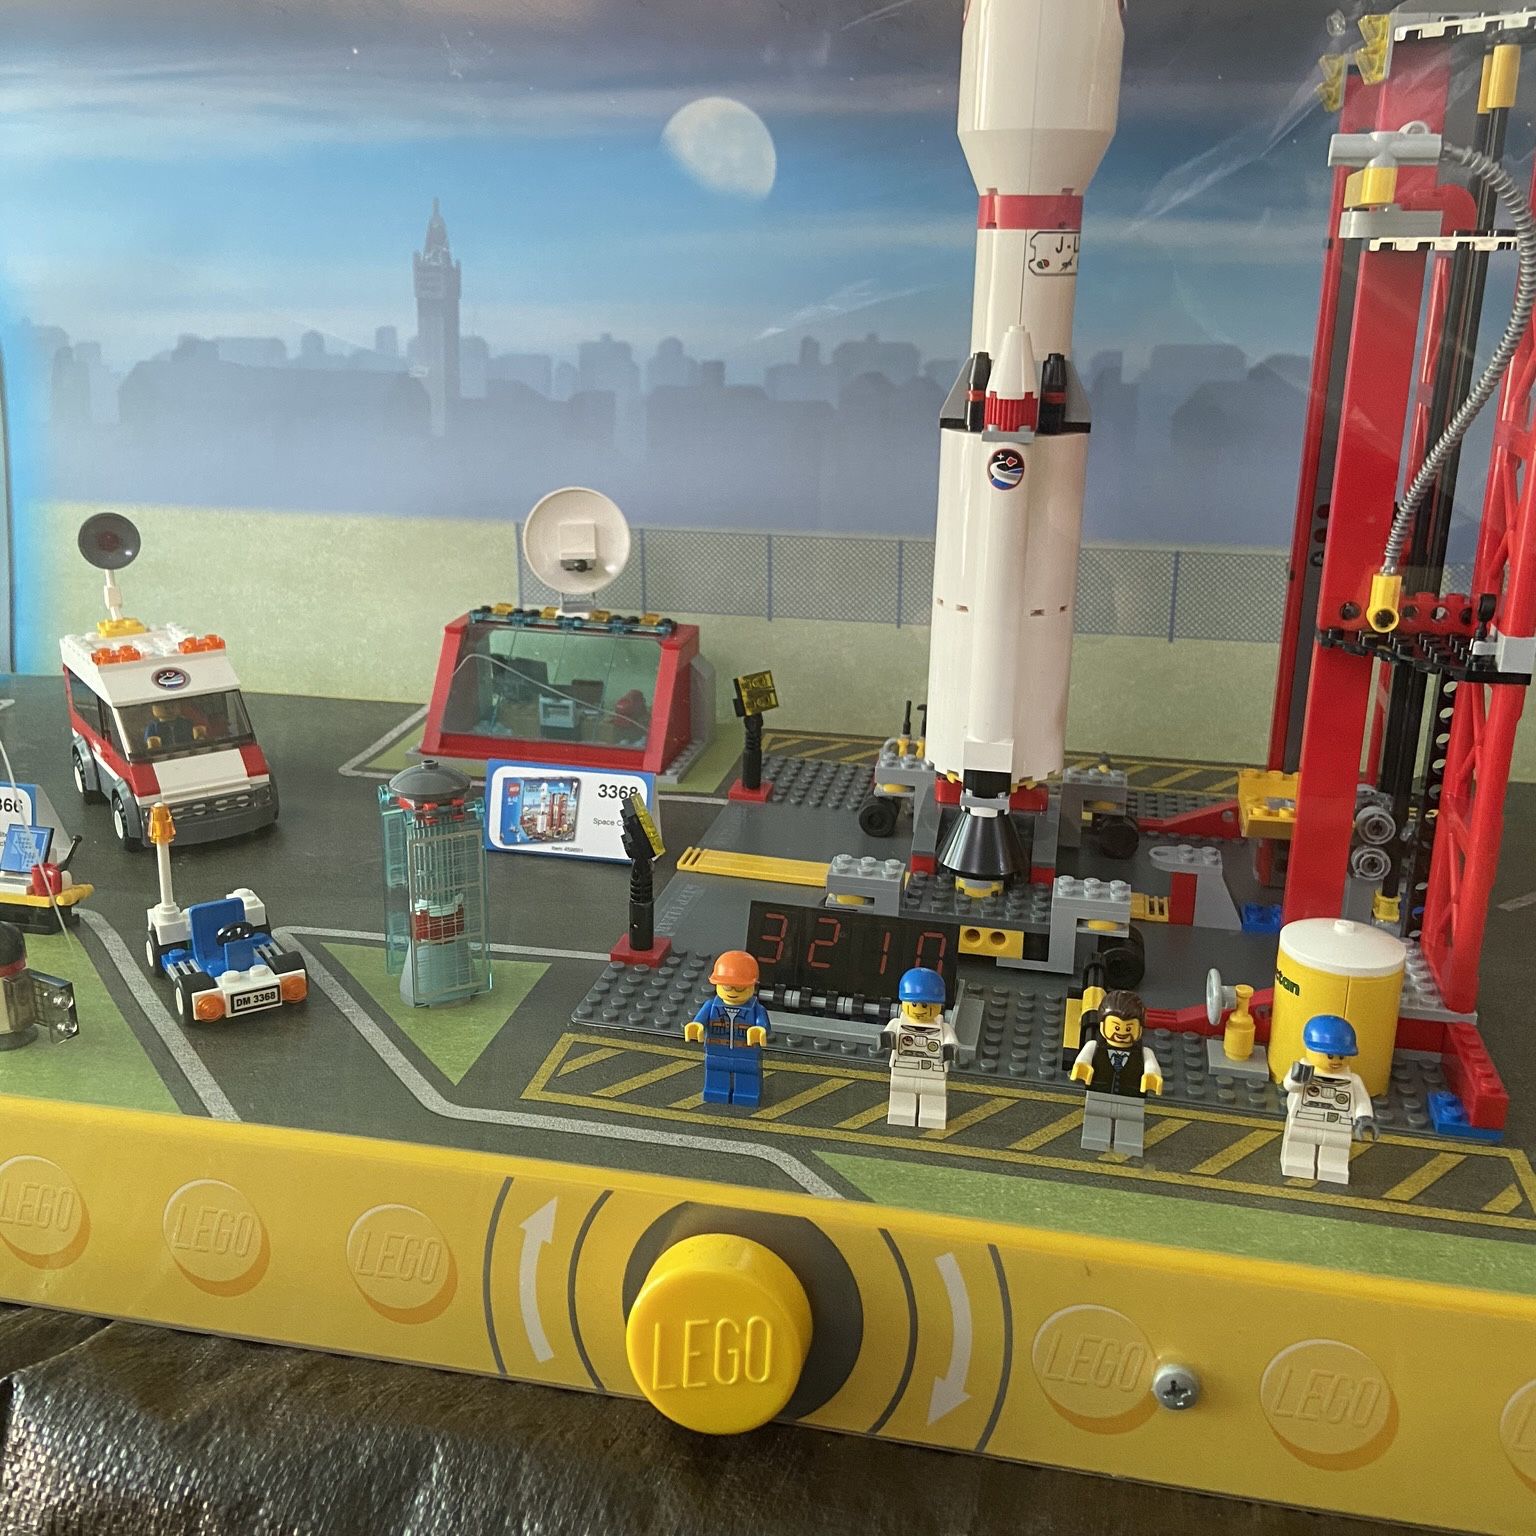 Toys R Us Lego City Space Display Set